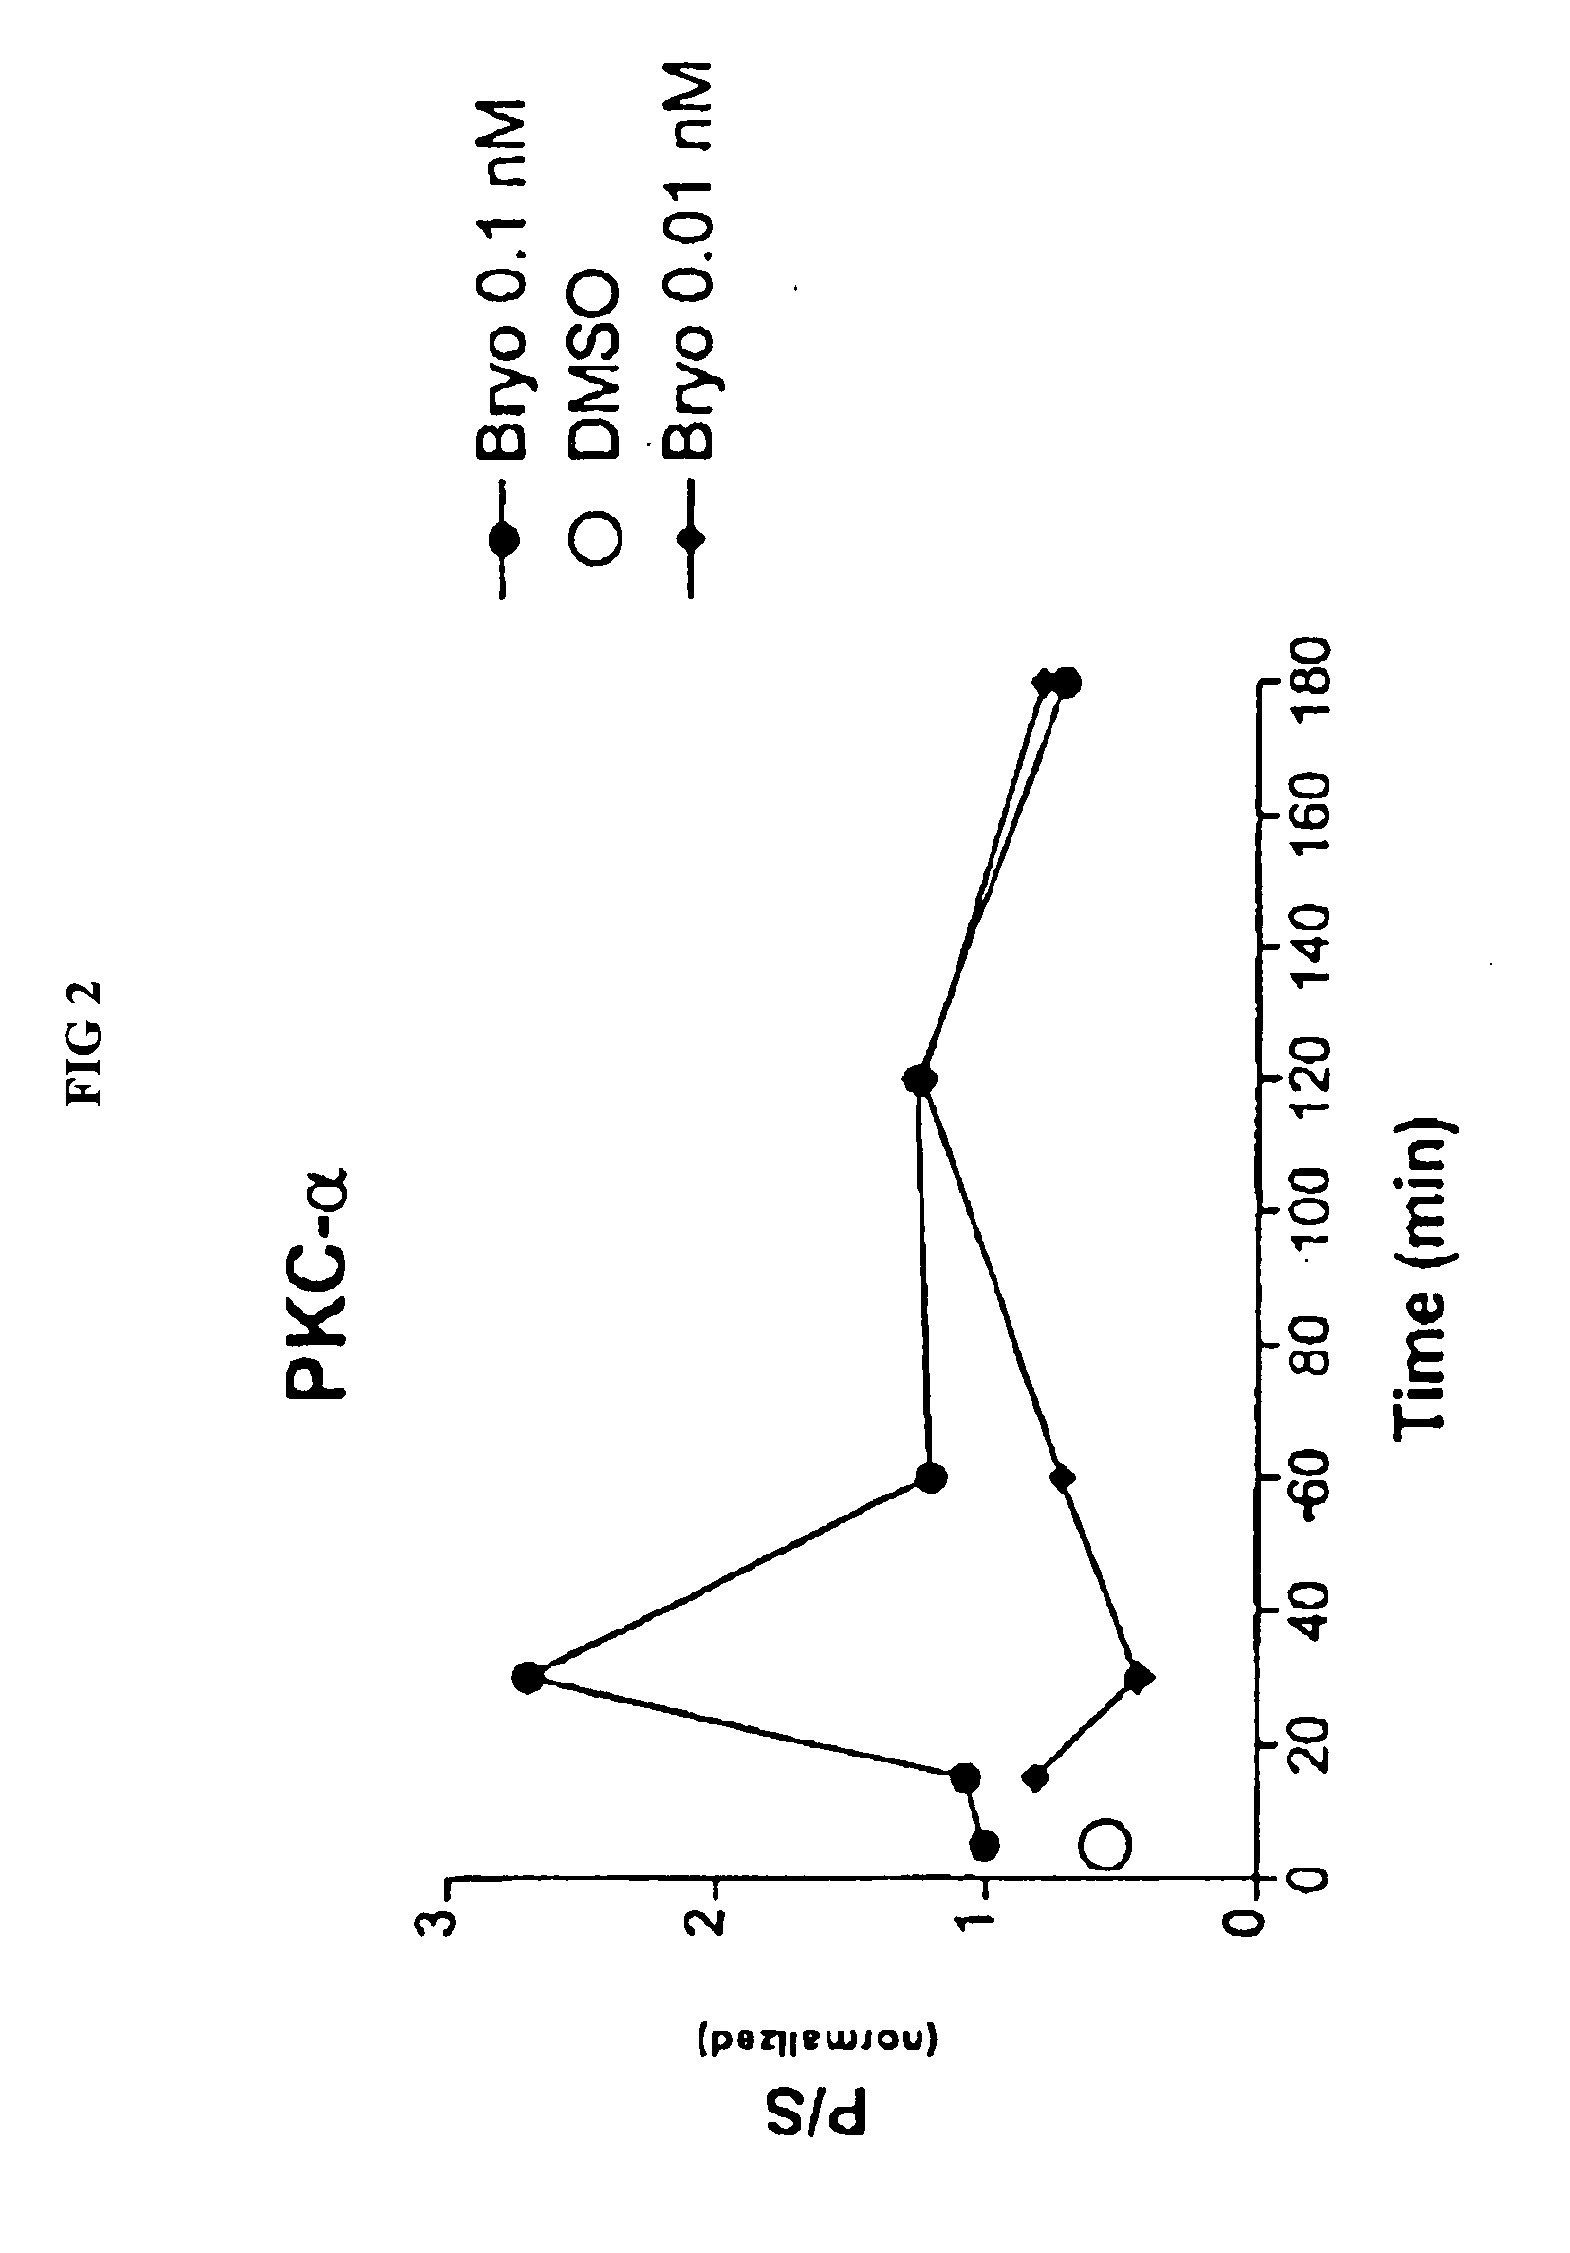 Methods for alzheimer's disease treatment and cognitive enhancement